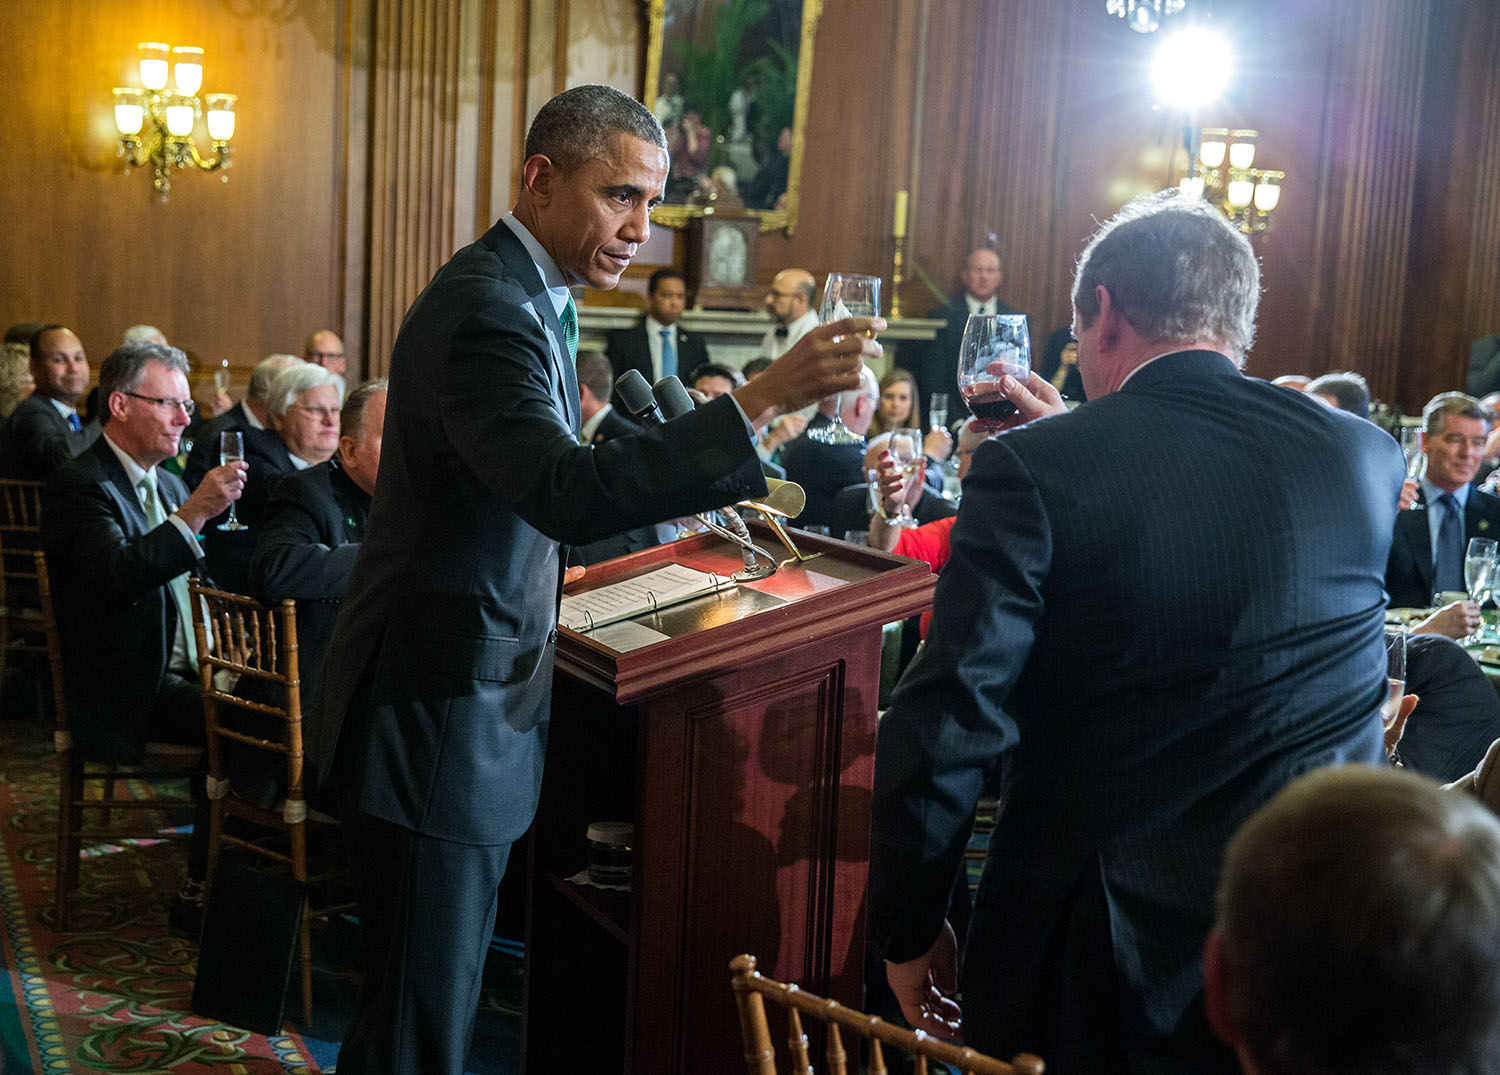 President Barack Obama offers a toast to Prime Minister Enda Kenny of Ireland during a St. Patrick's Day lunch